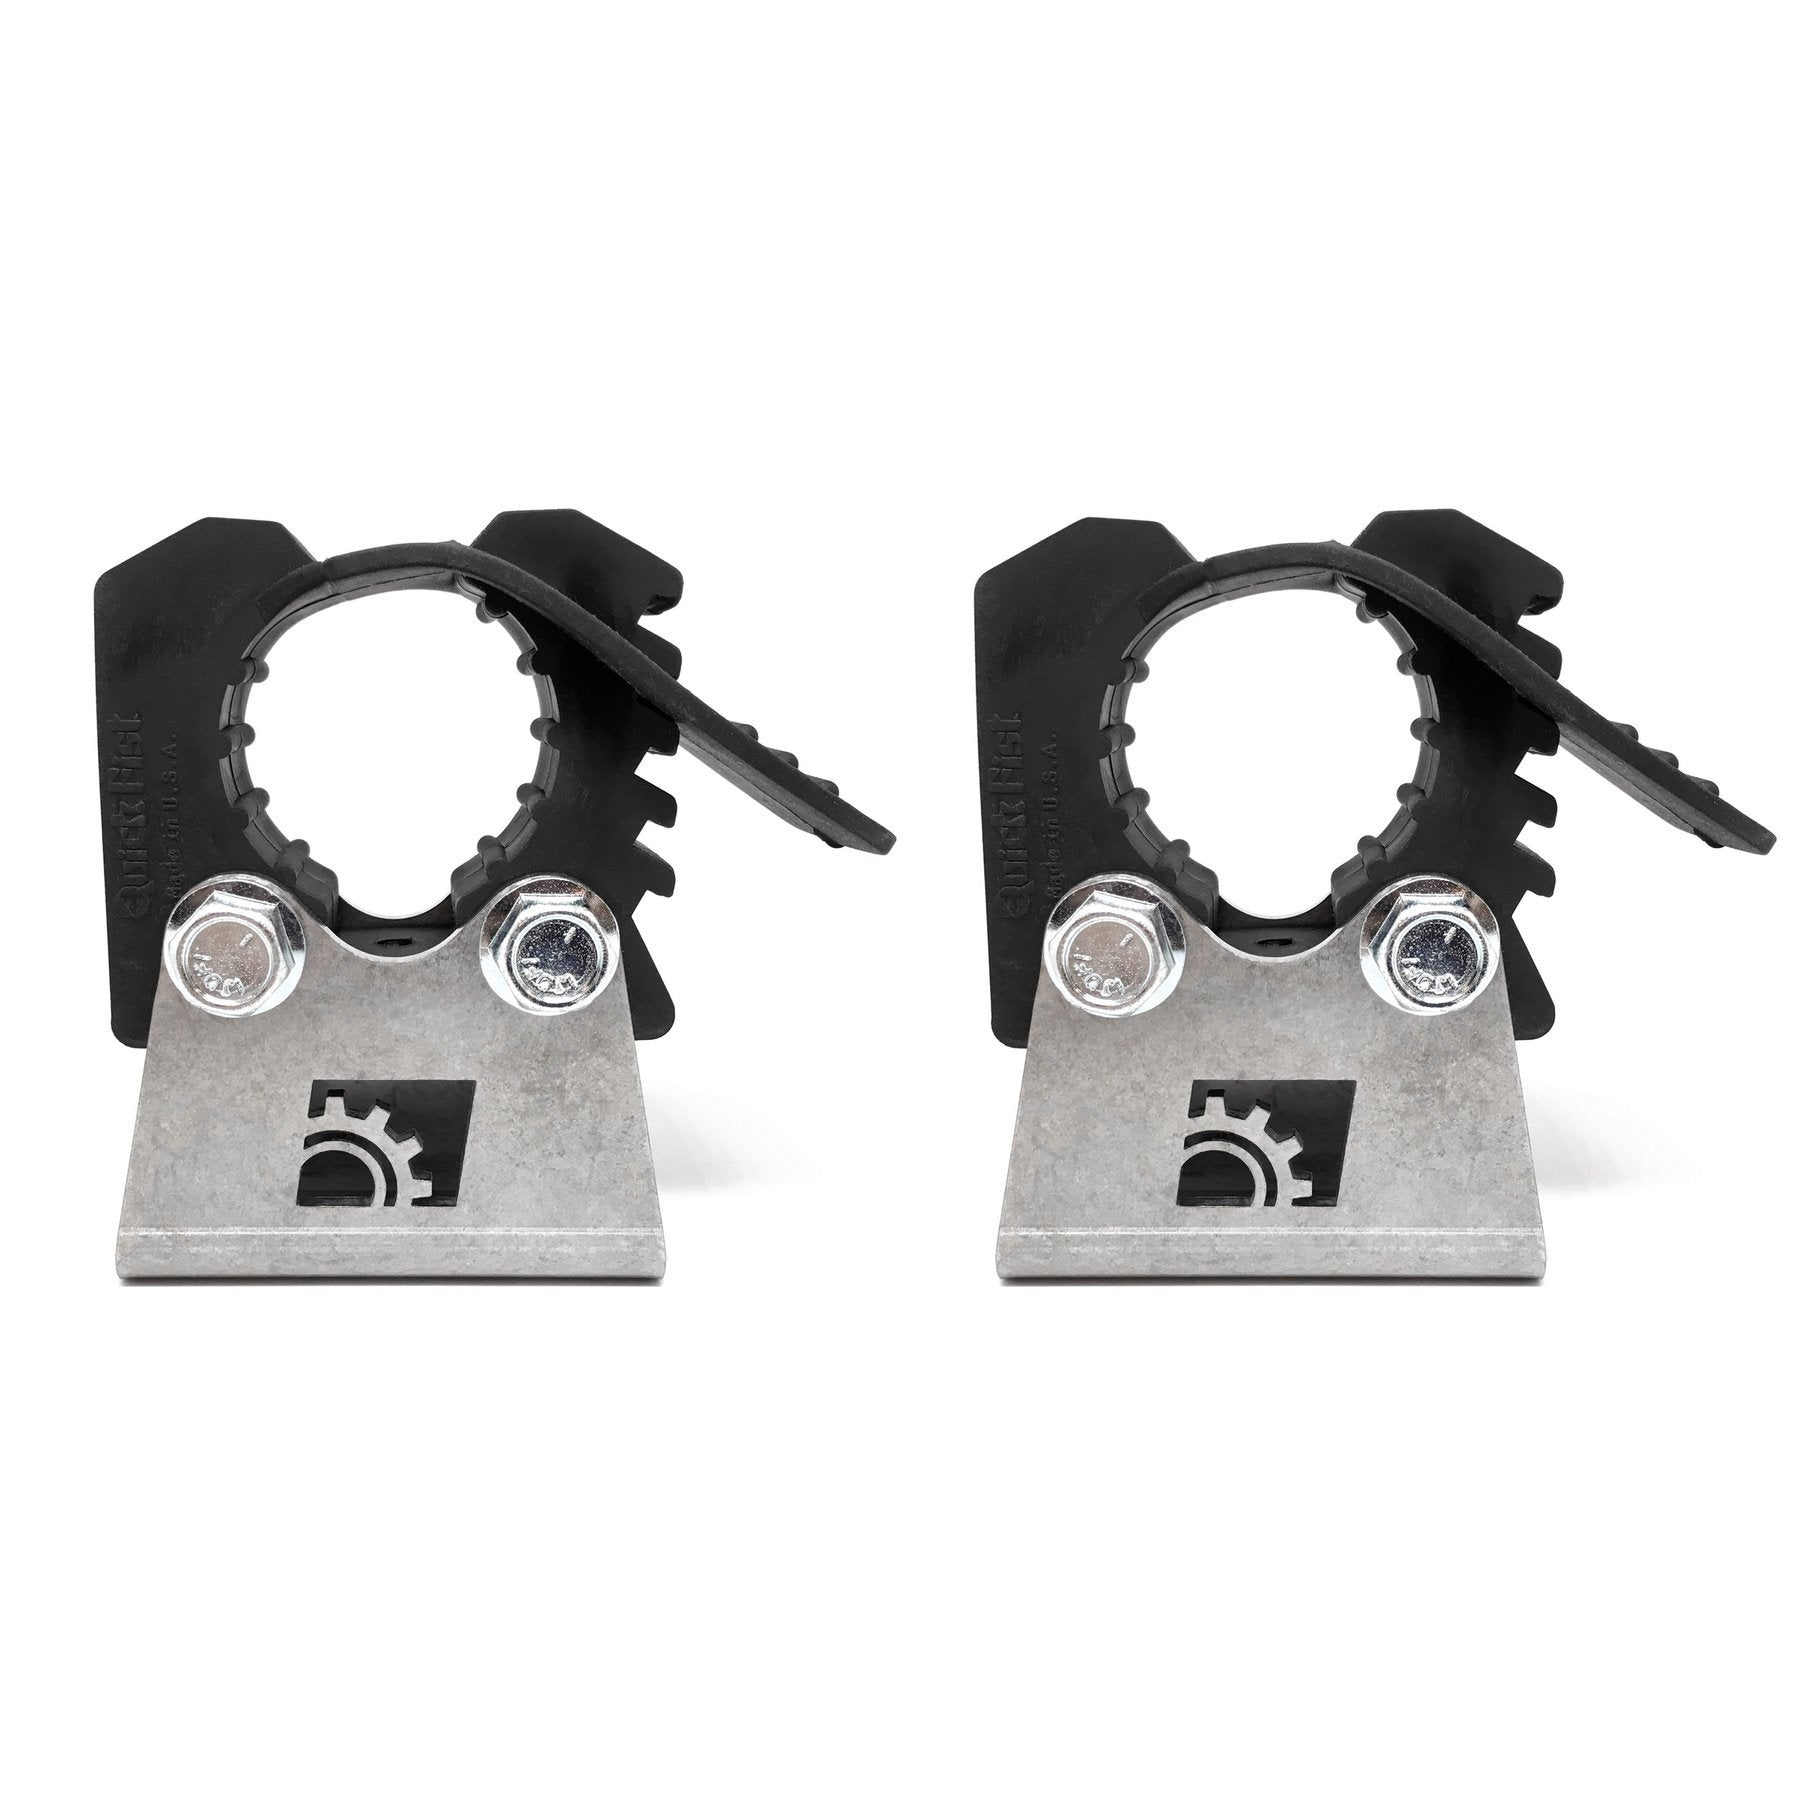 Riser Mount (Pair) - Includes 1" - 2.25" Clamps